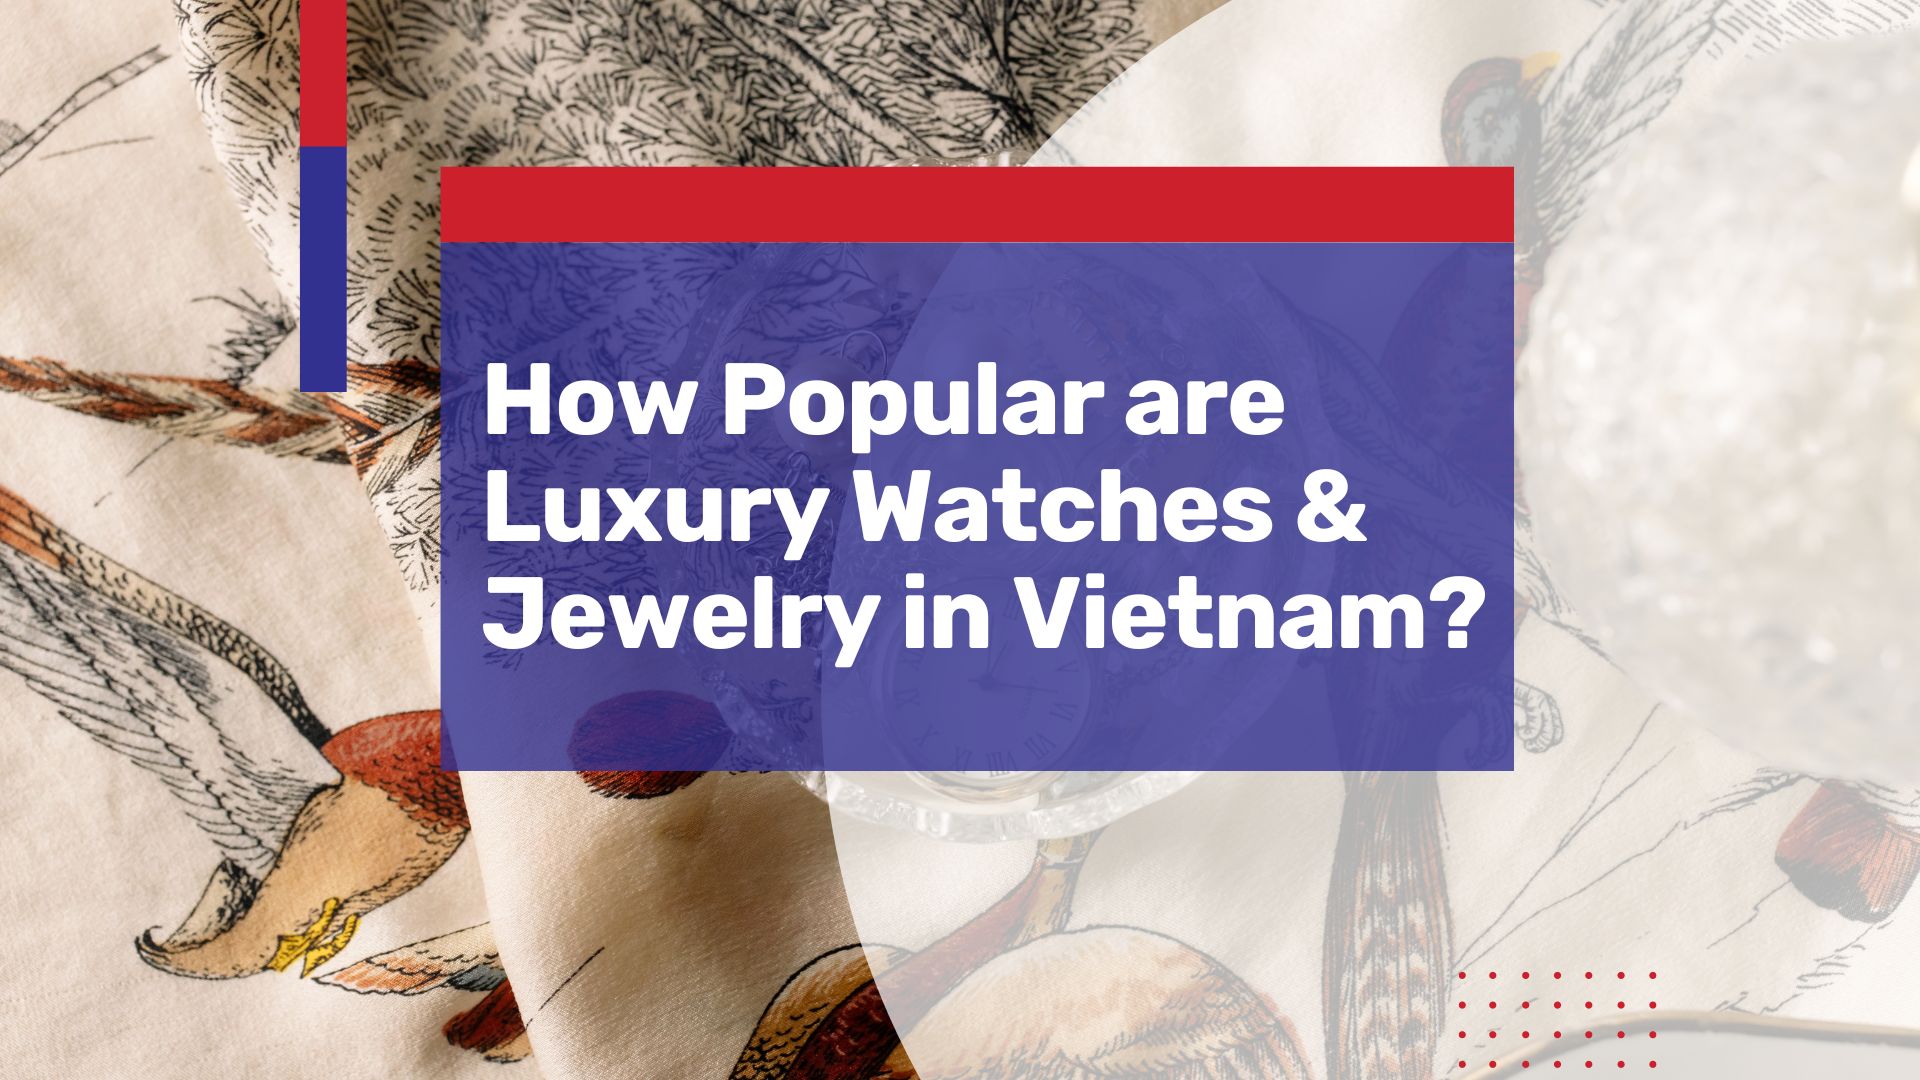 How Popular are Luxury Watches and Jewelry in Vietnam? – An Overview of the Market